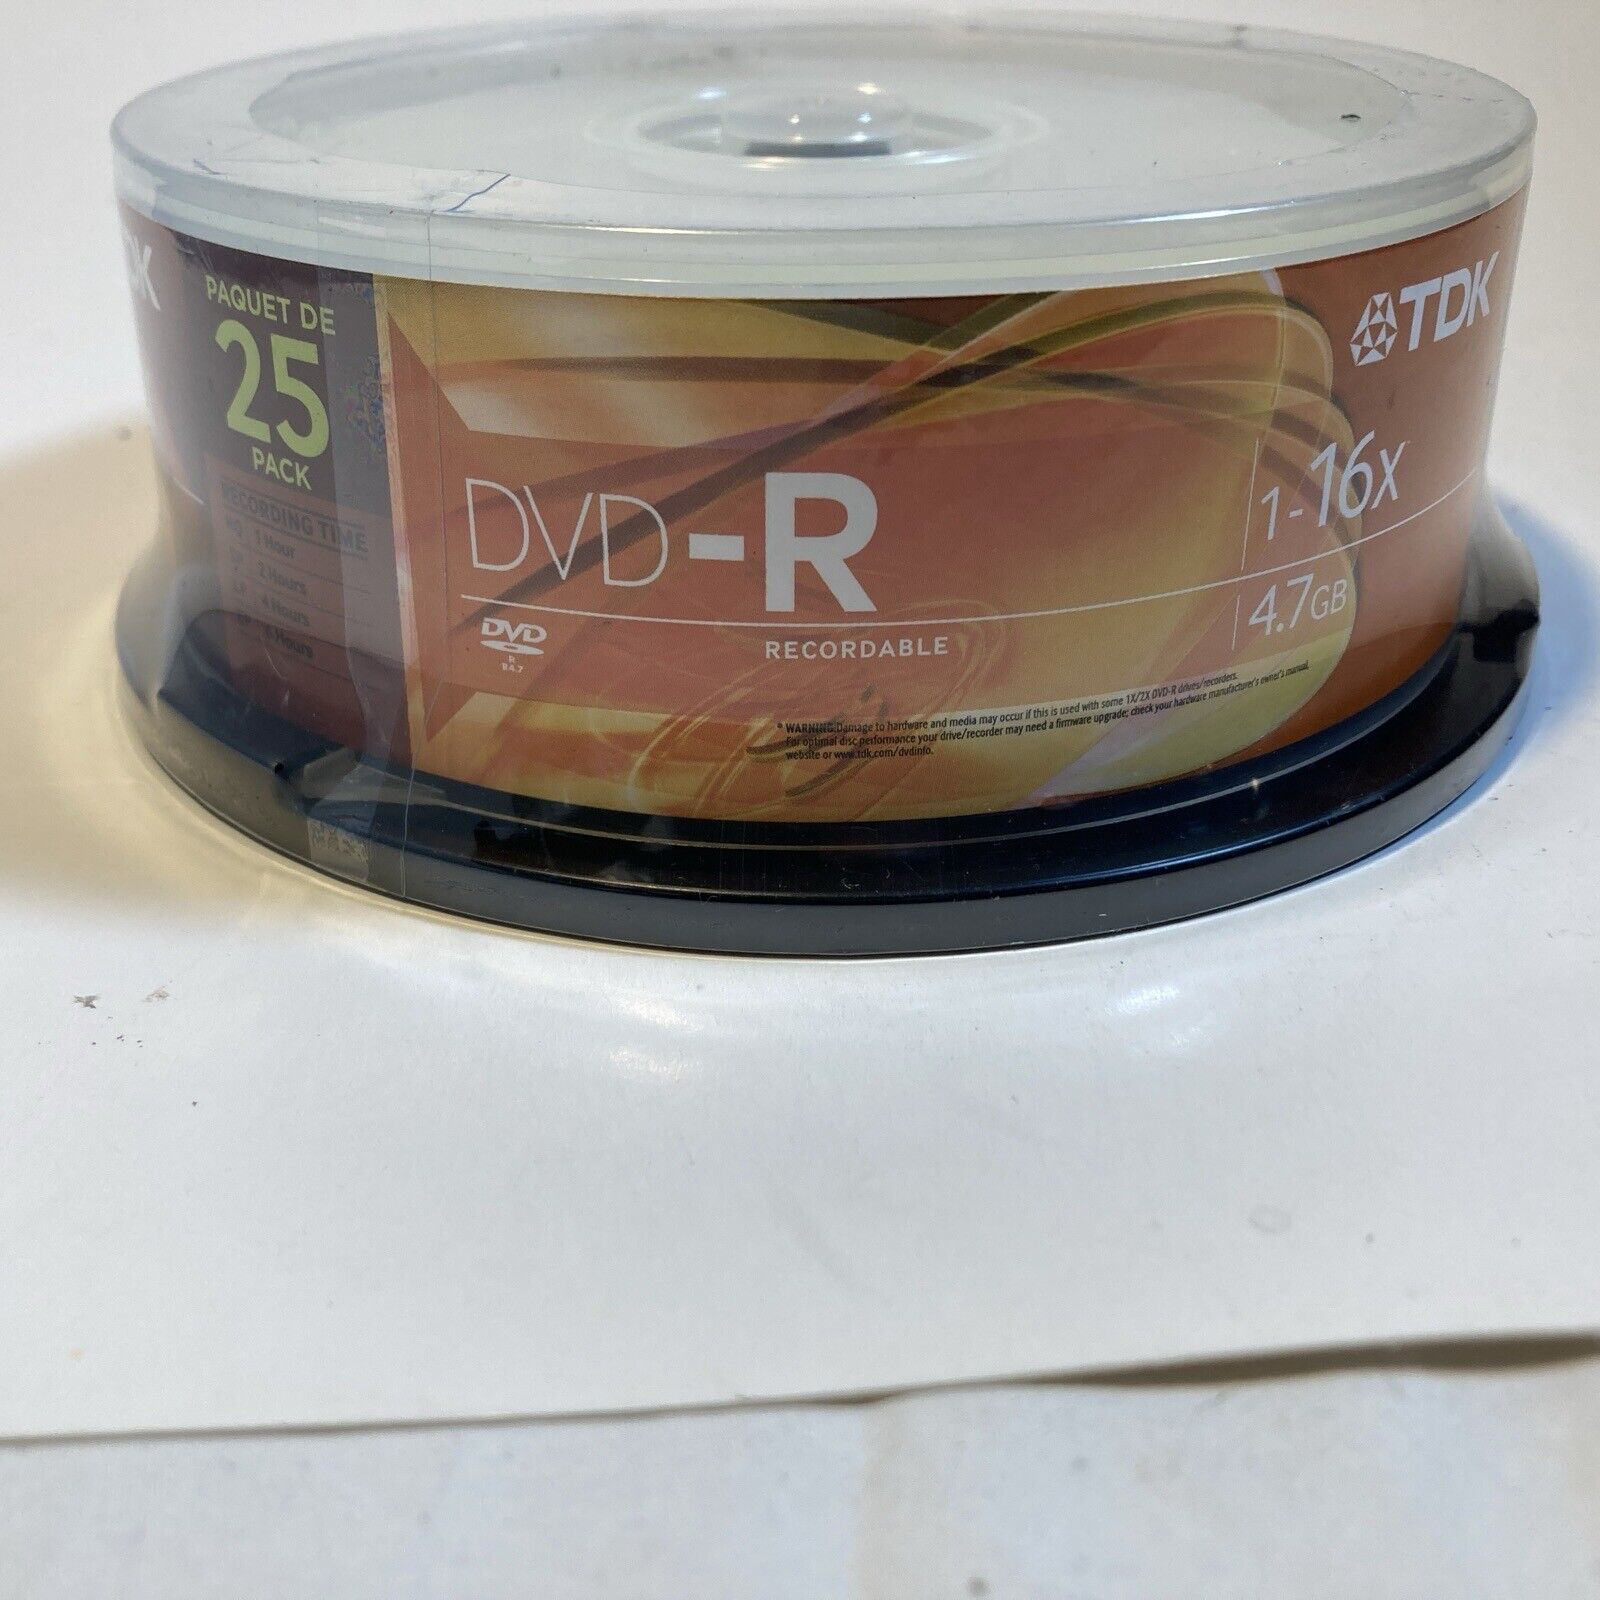 TDK DVD-R 25 Pack 4.7GB 120 Minutes 16X Recordable DVD - R  Disks Factory Sealed